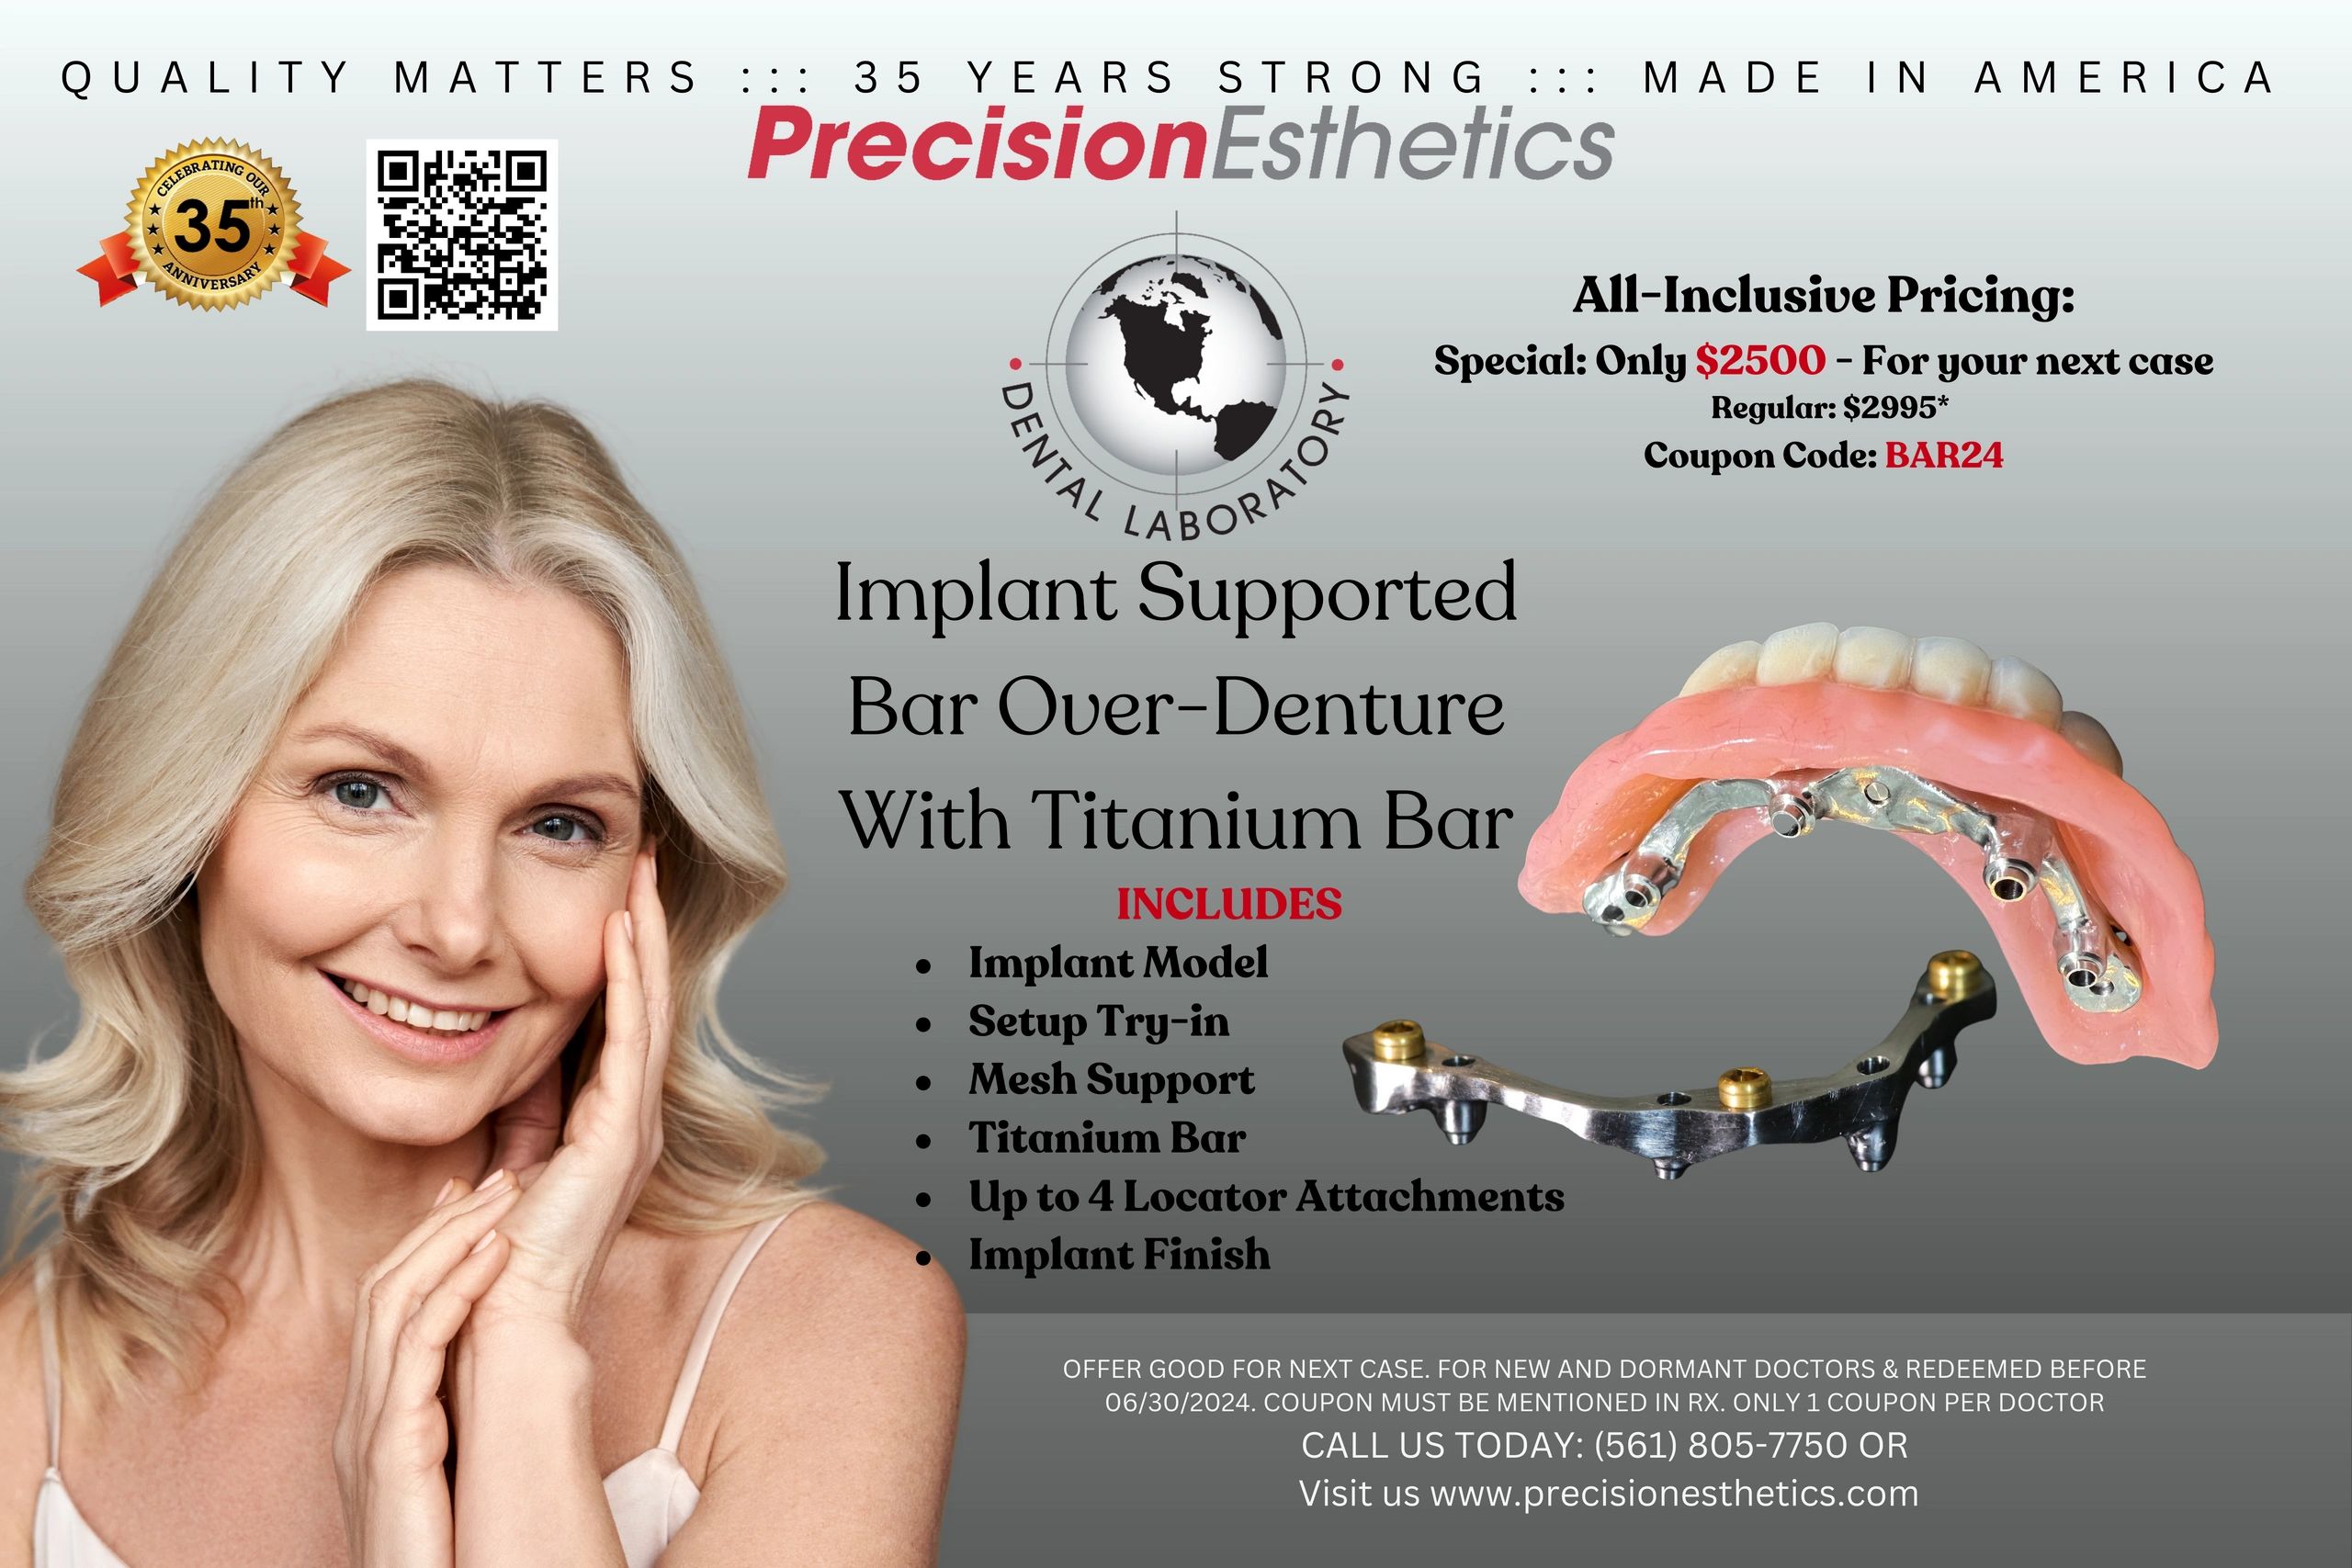 Implant Supported Bar Over-Denture Coupon from Dental Laboratory with prices